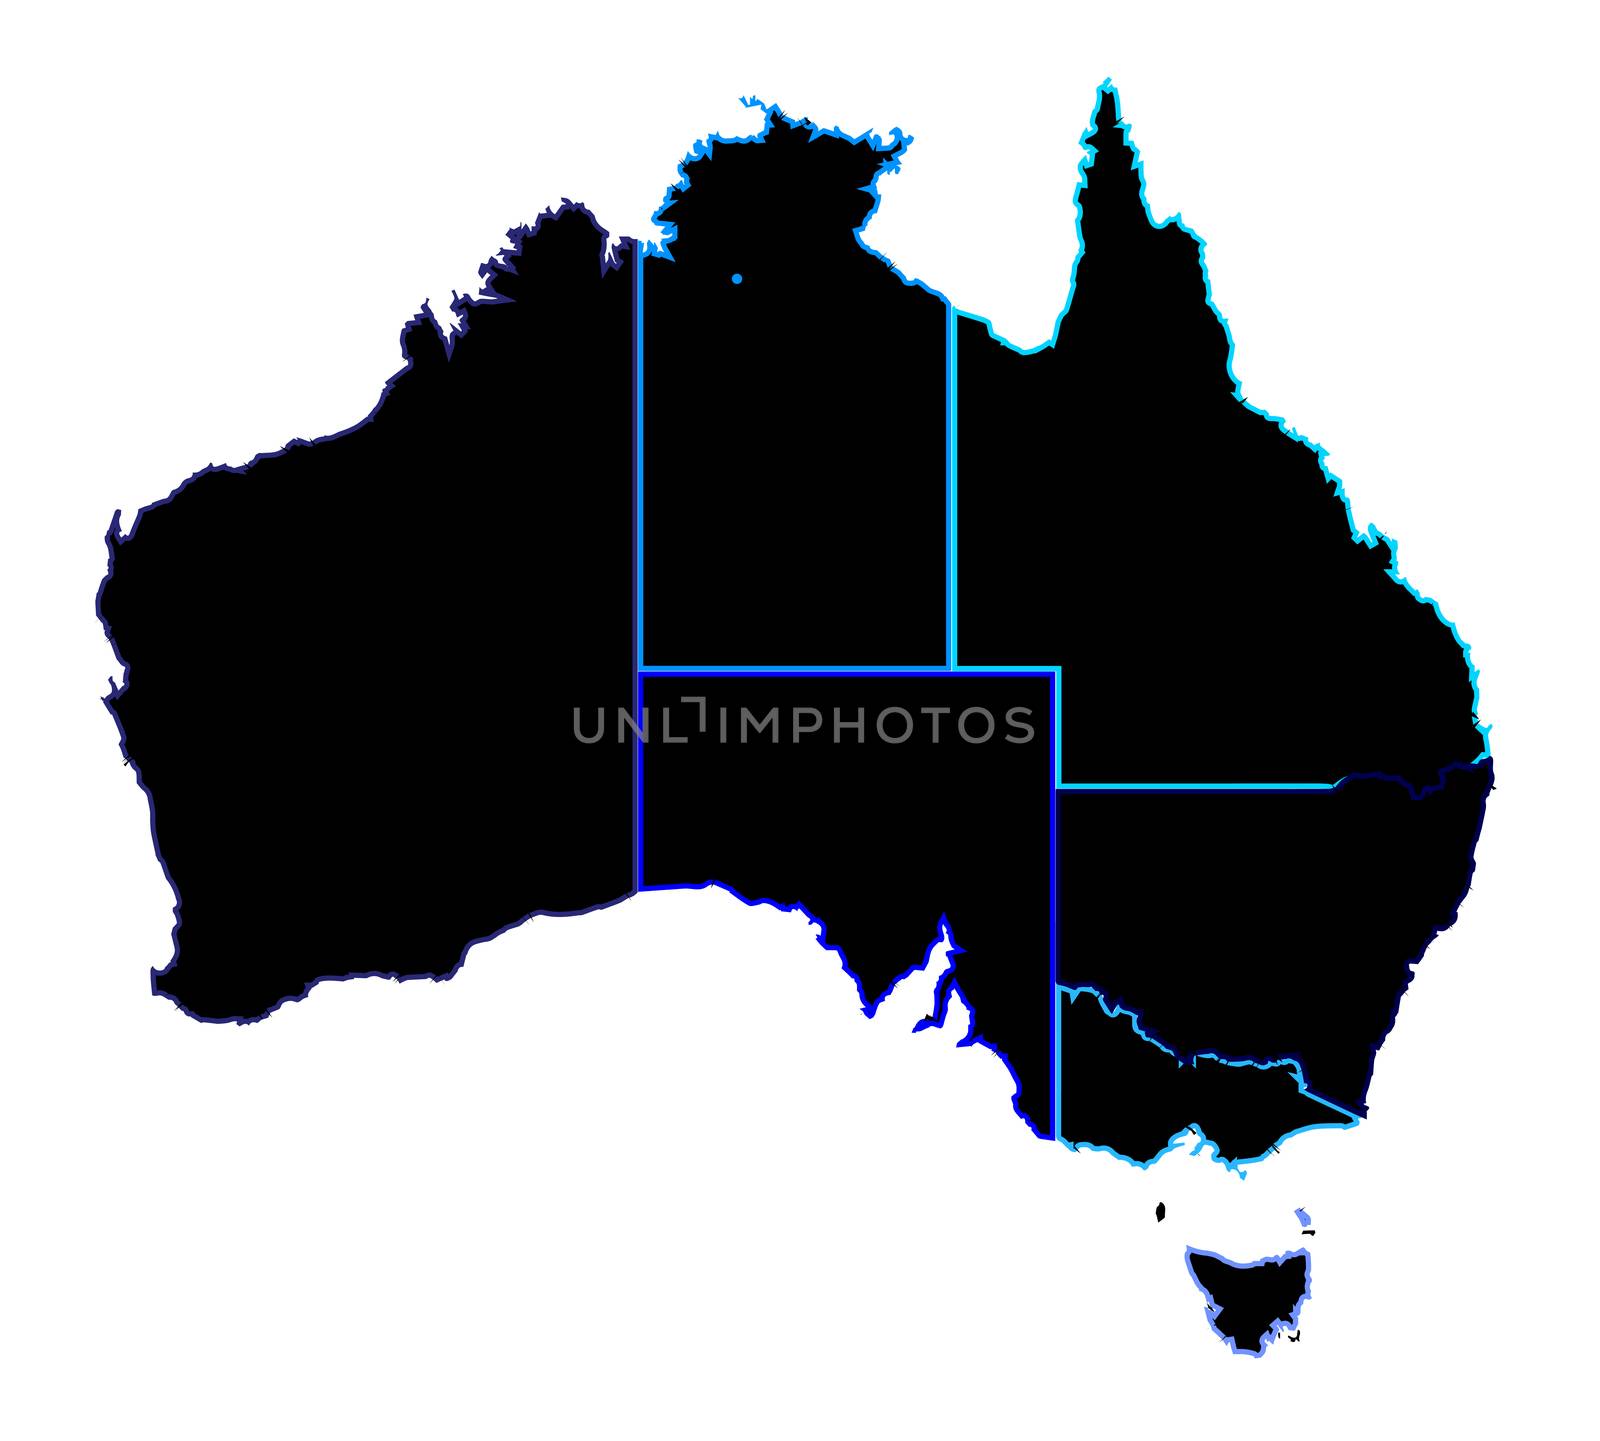 Silhouette map of the Australian states over a white background